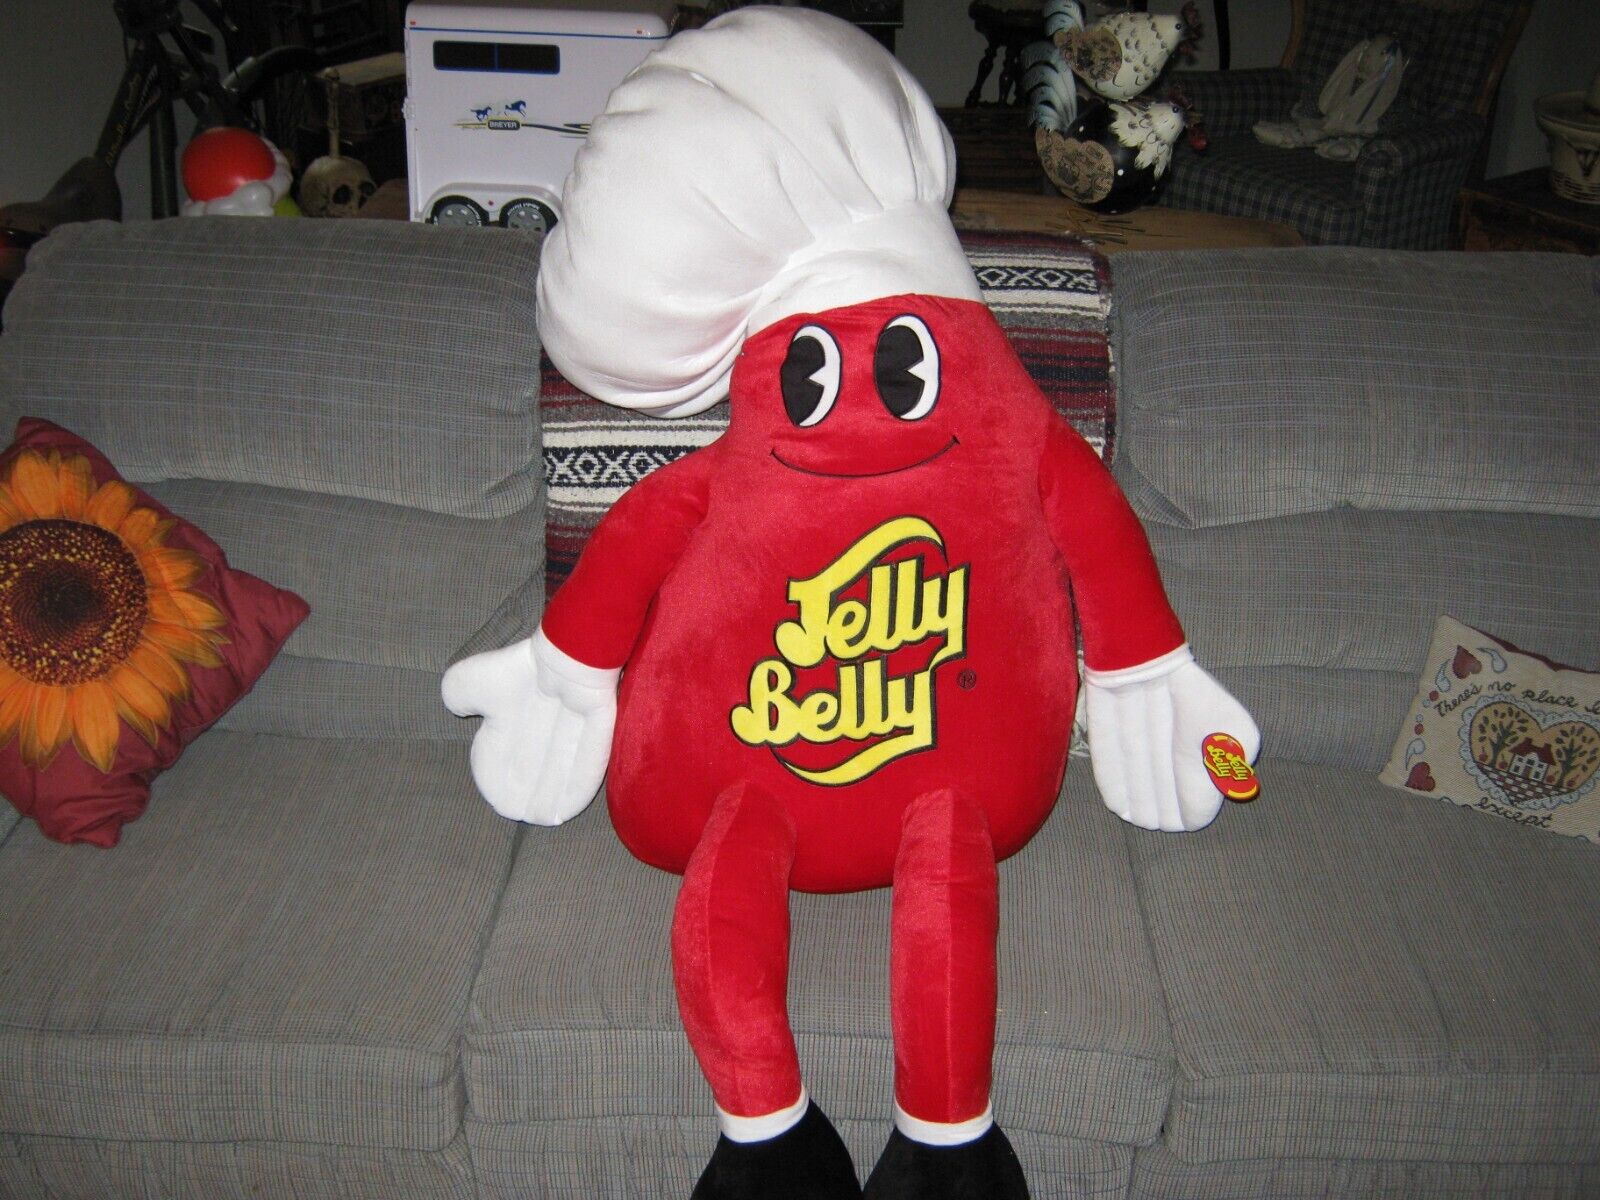 MR JELLY BELLY HUGE STUFFED RETAIL DEALER DISPLAY JELLY BEAN ADVERTISEMENT